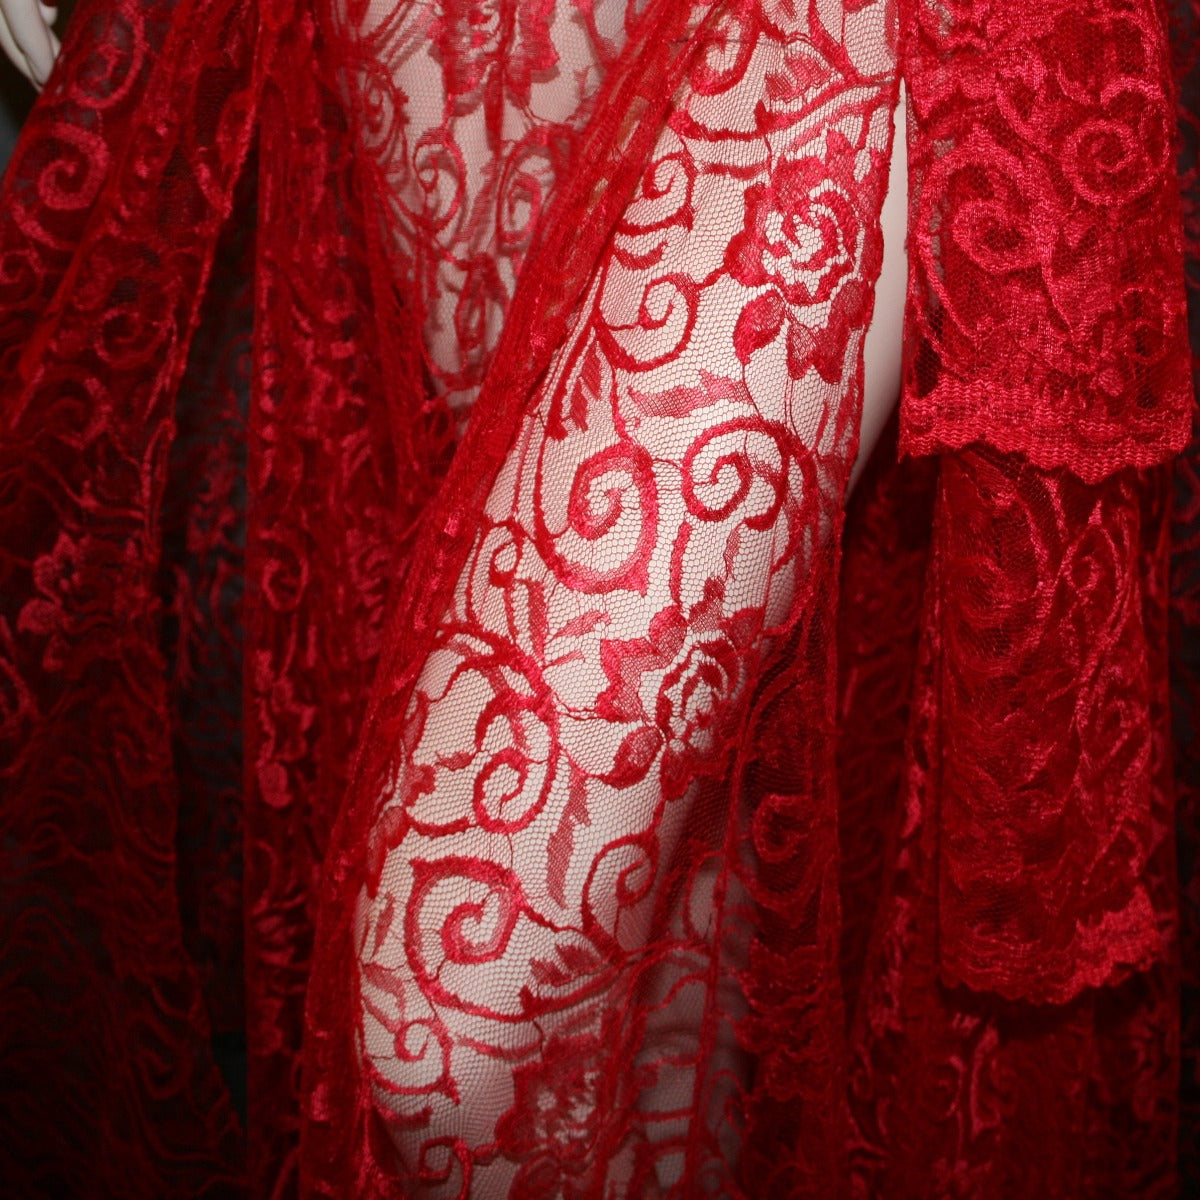 close view of Red lace ballroom skirt, wrap style, was created with yards of red lace, many panels shaped like large petals.